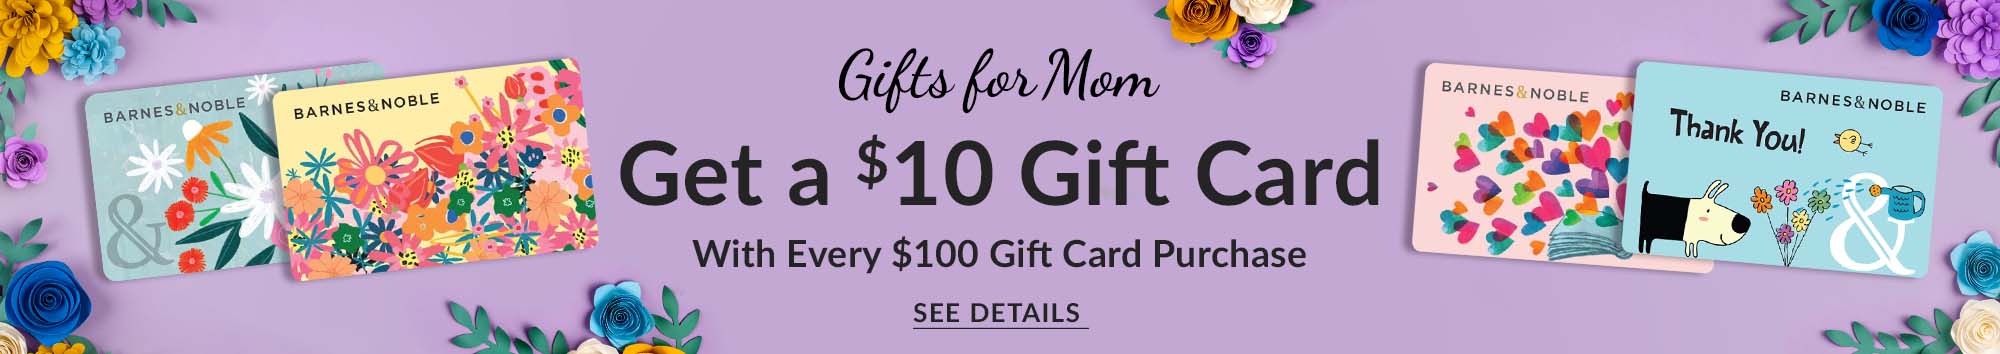 Gifts for Mom. Get a $10 Gift Card with every $100 of gift cards purchased